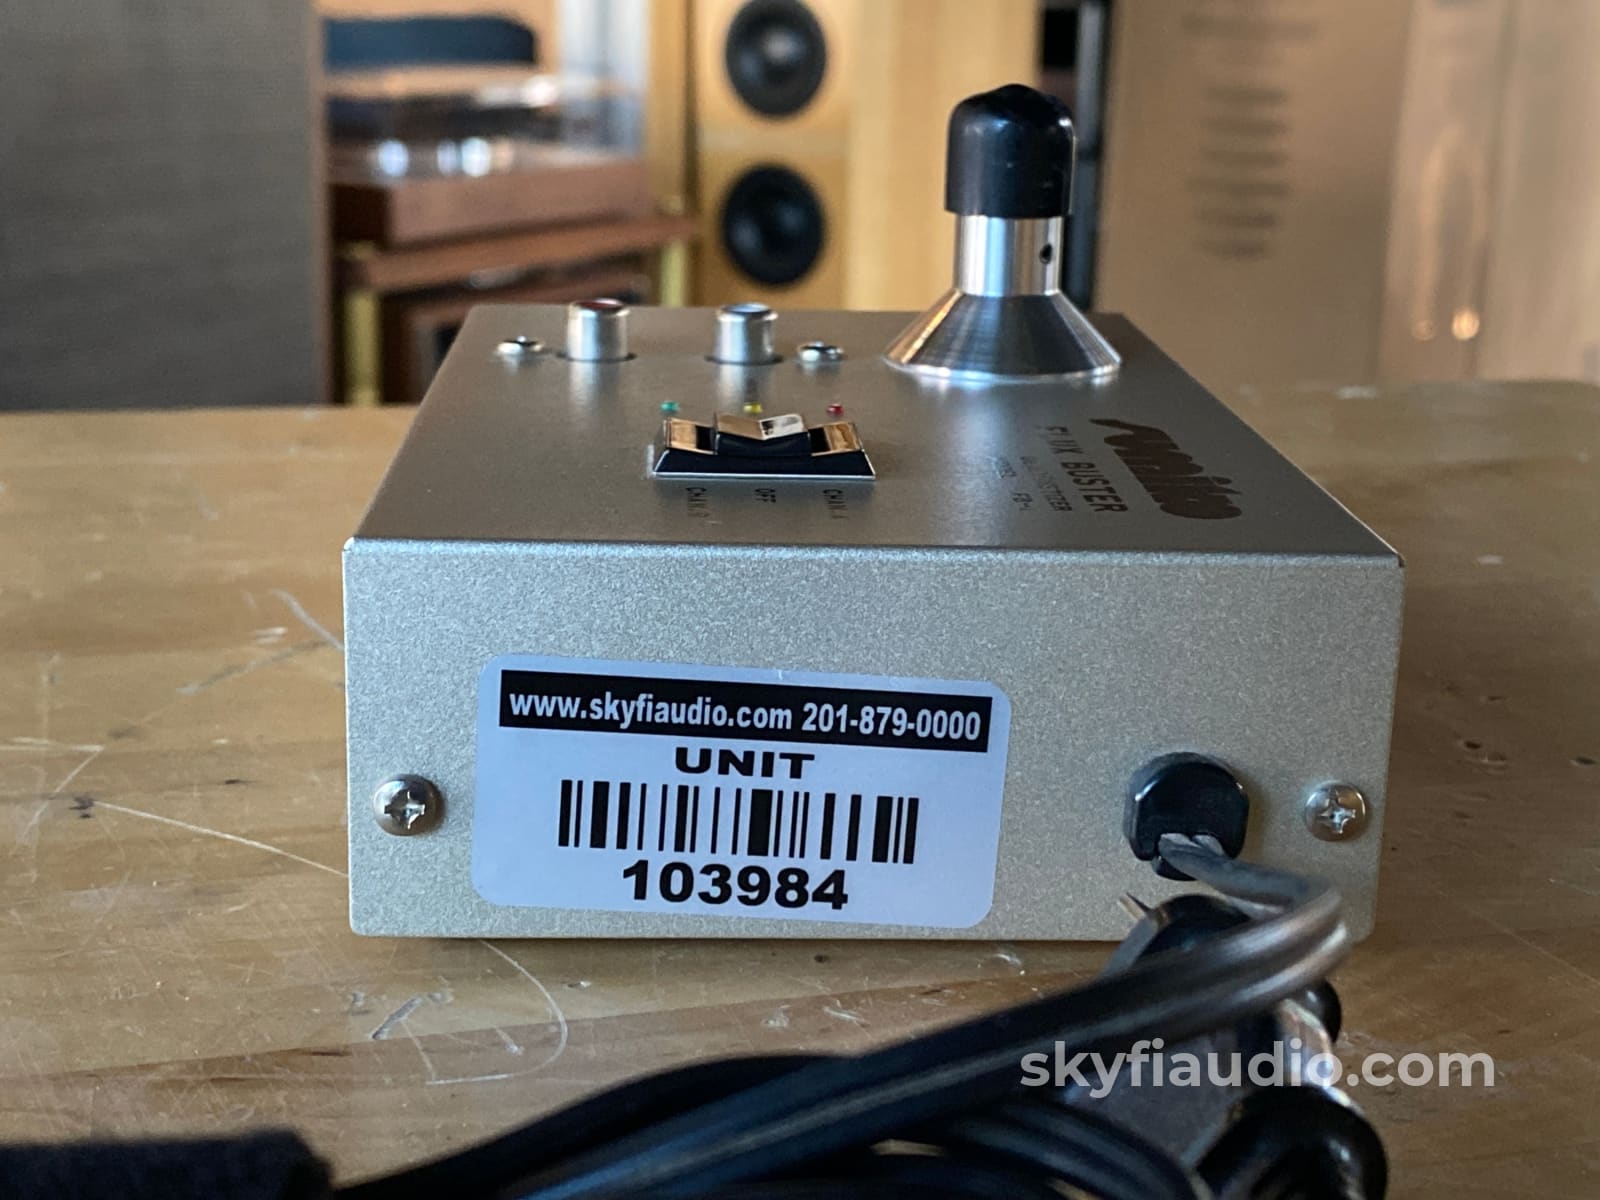 Sumiko Flux Buster Fb-1 Phono Cartridge Demagnetizer - Get The Most From Your Turntable! Accessory